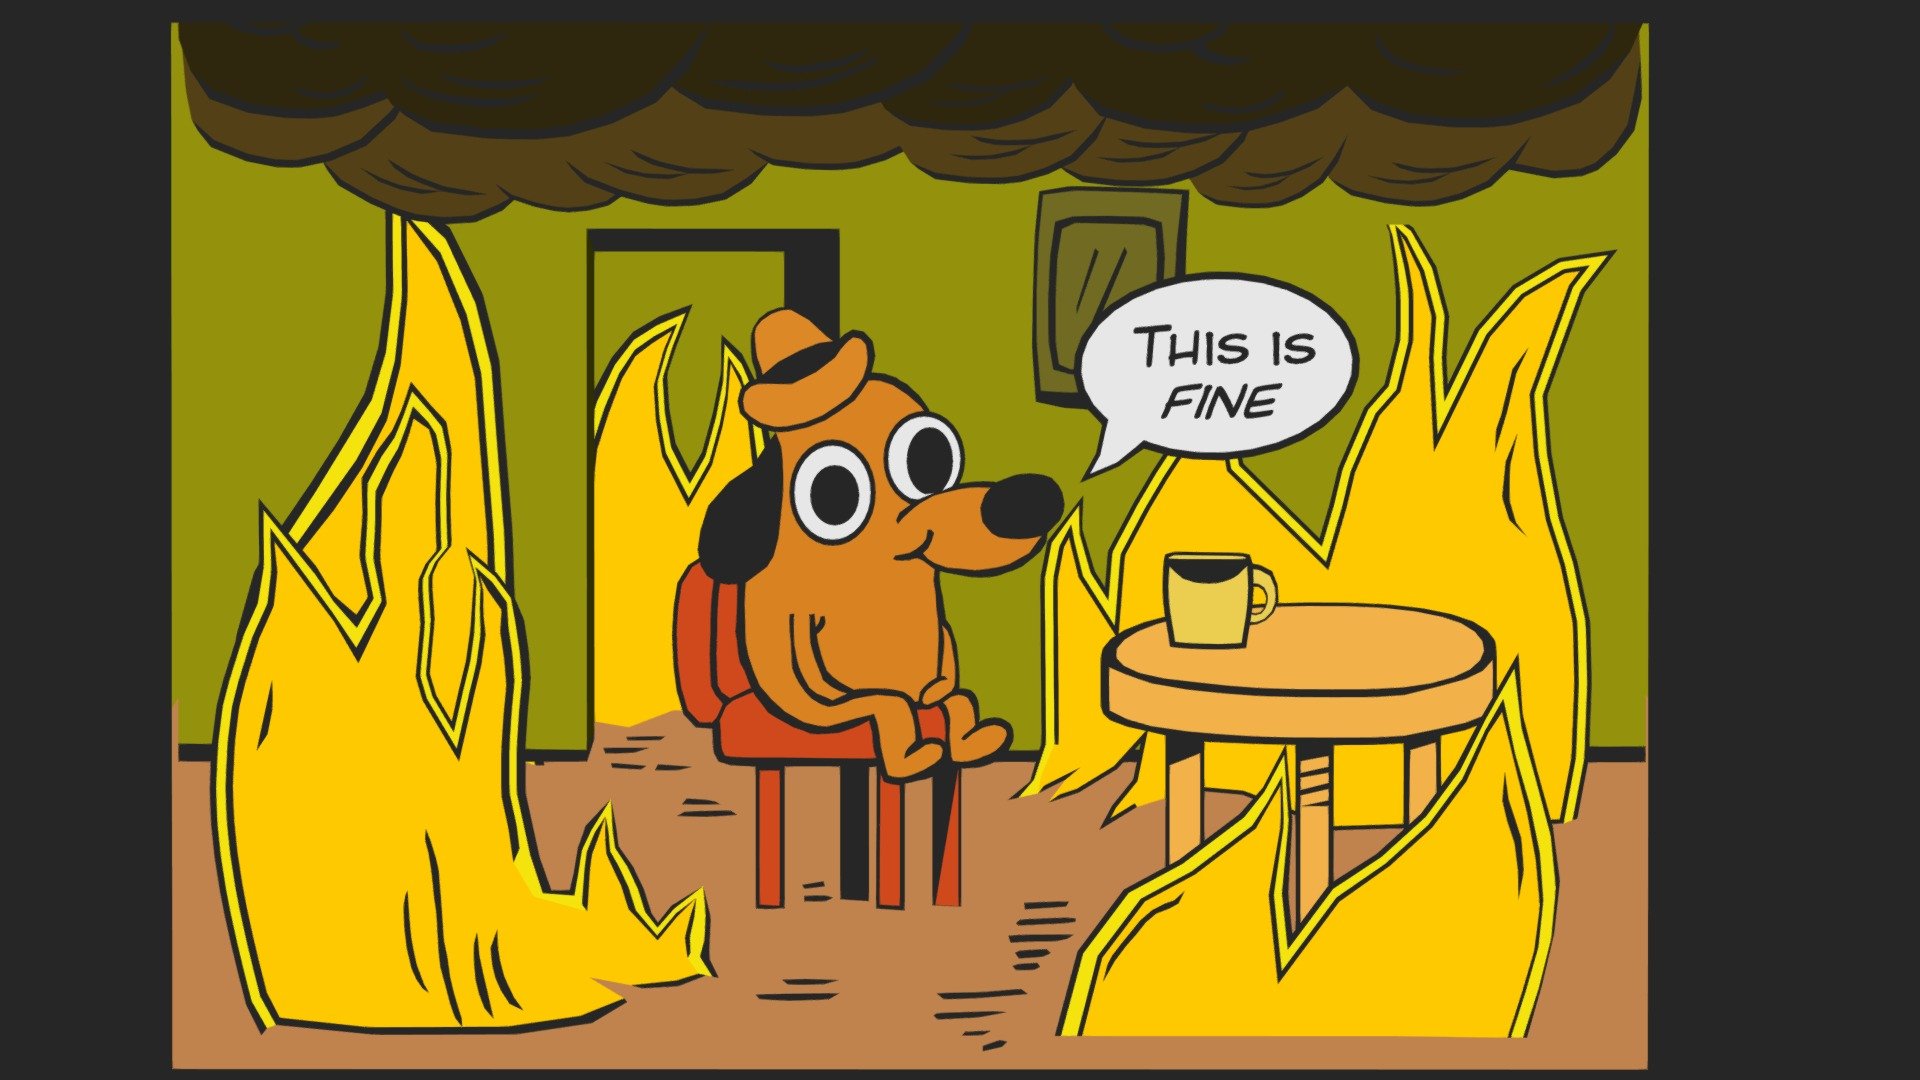 The “This is fine” meme